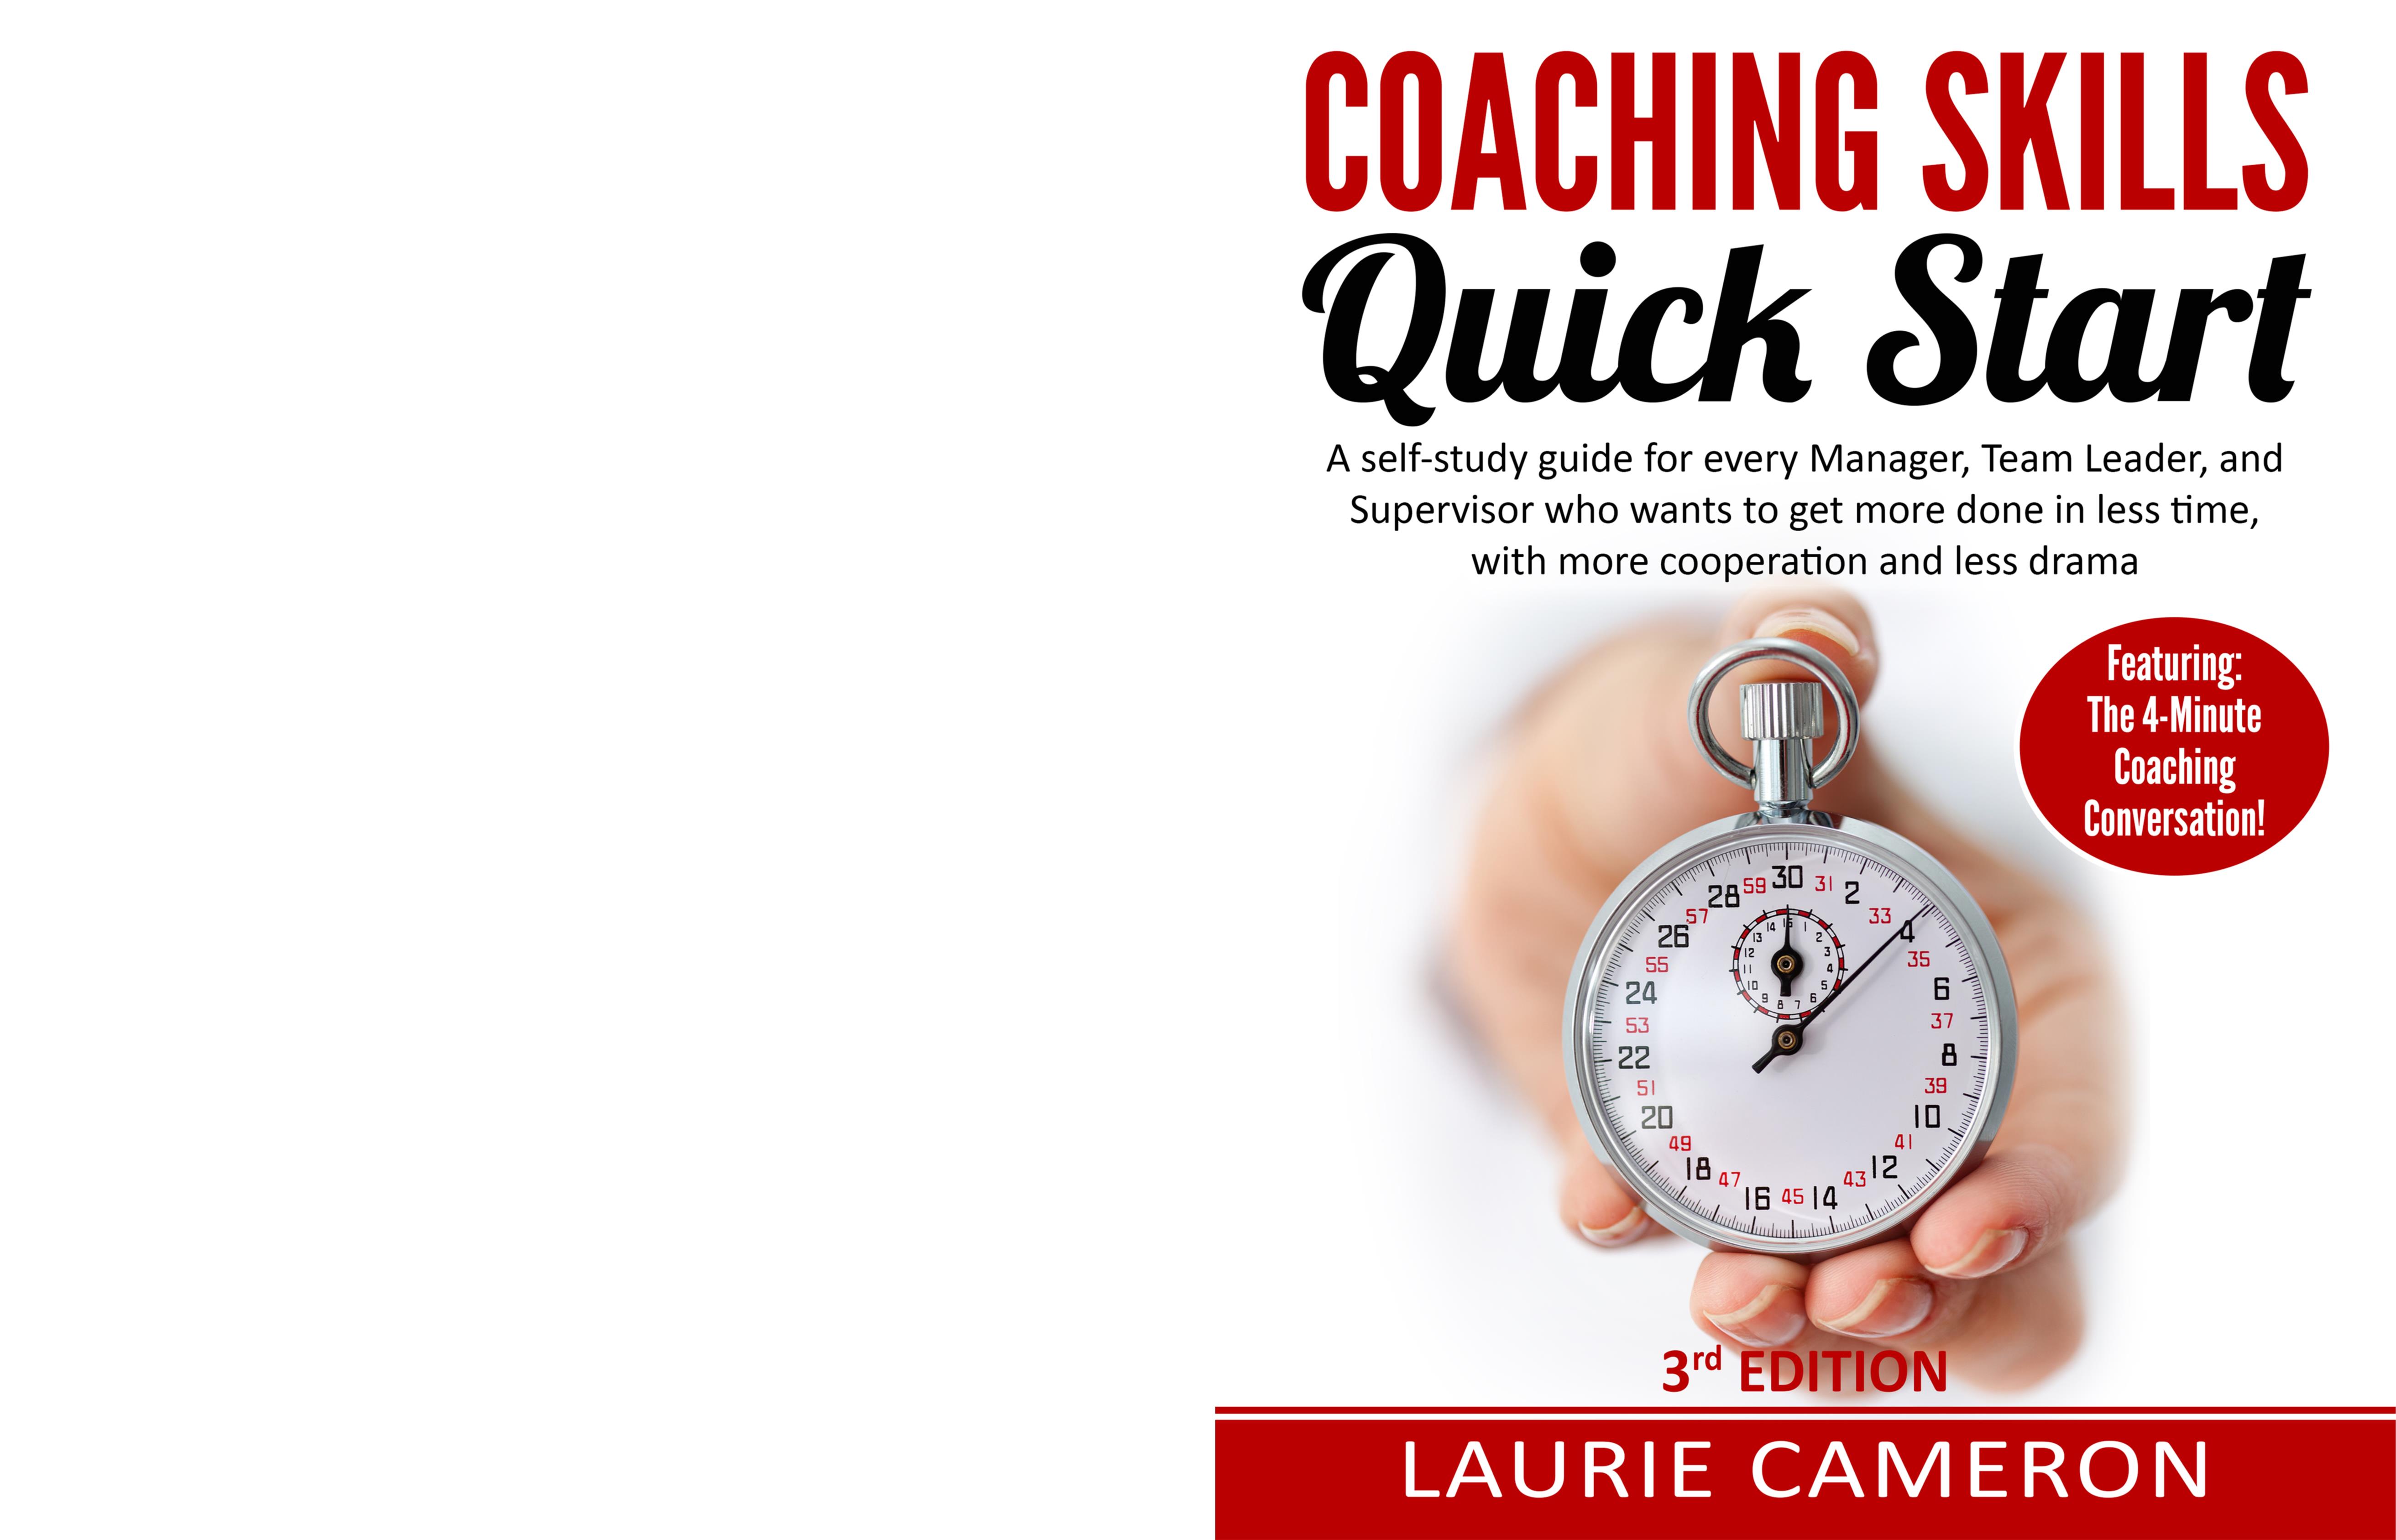 Coaching Skills Quick Start 3rd Edition cover image